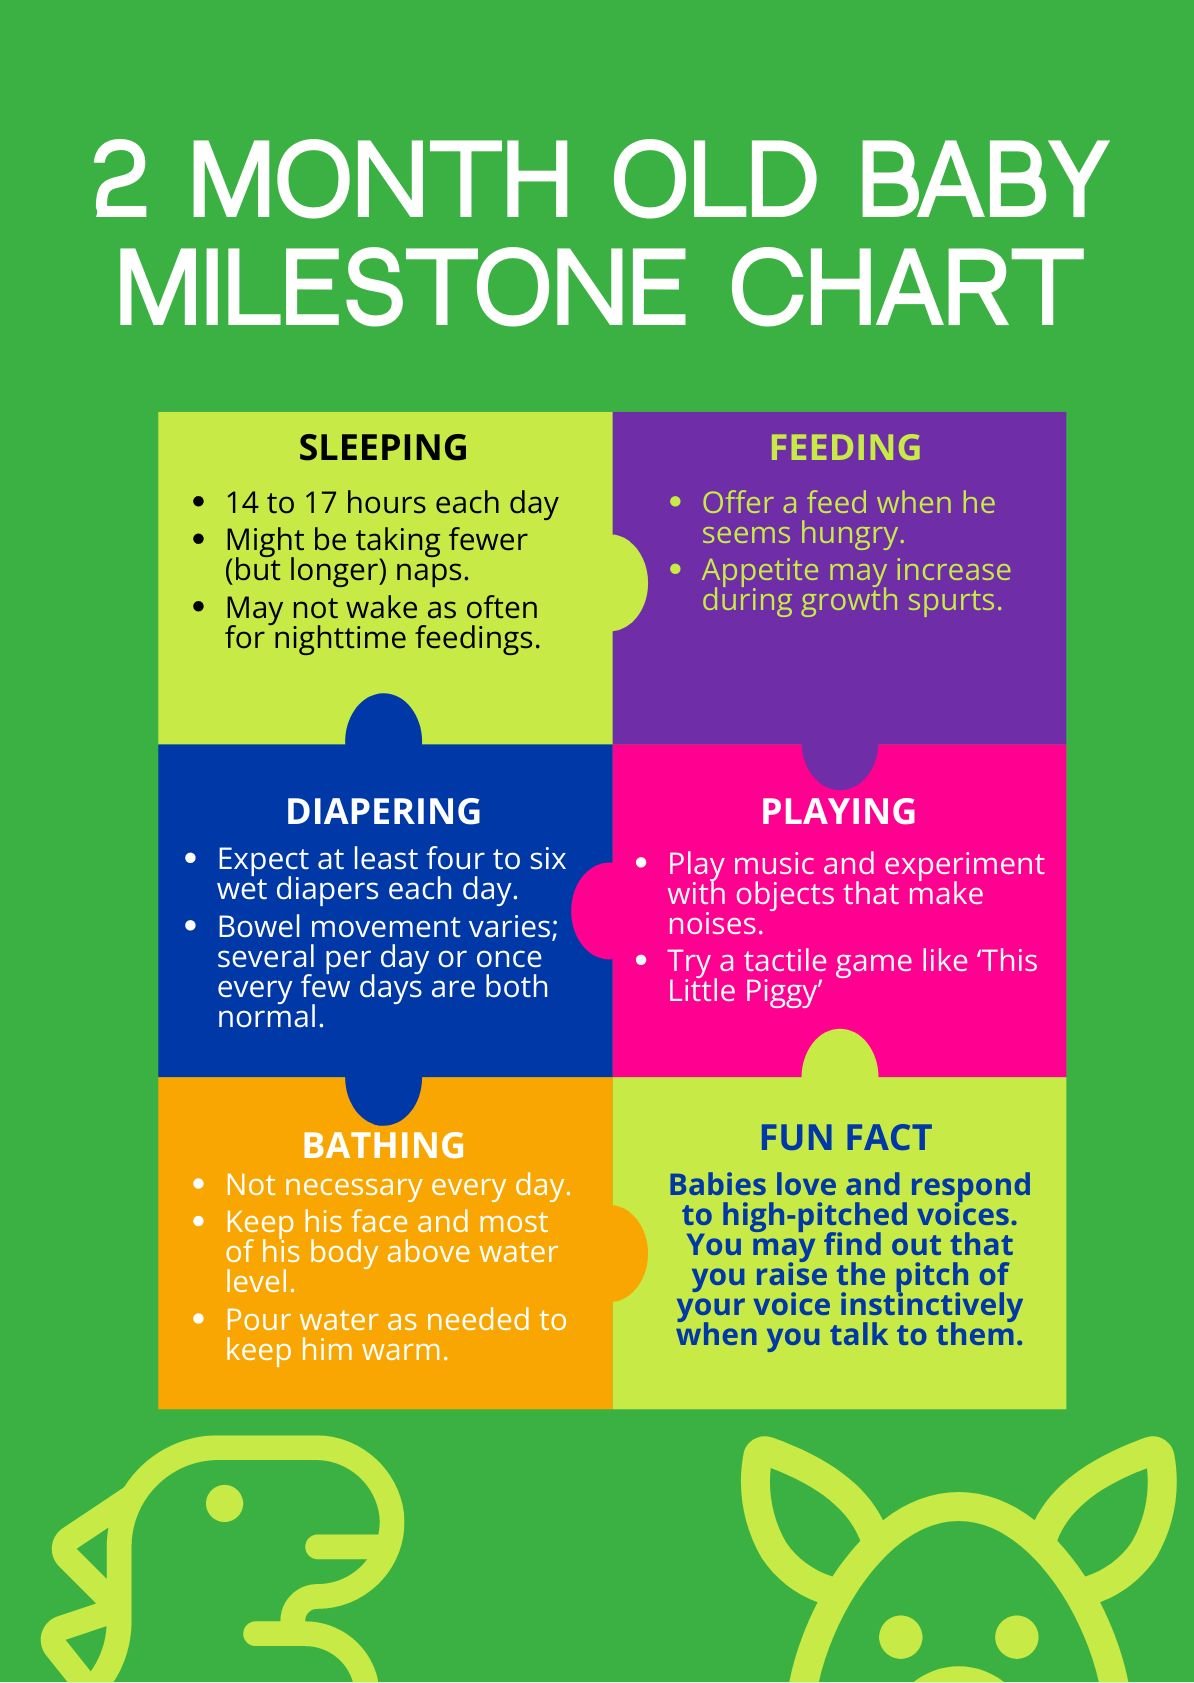 2 Month Old Baby Milestones Chart in PDF